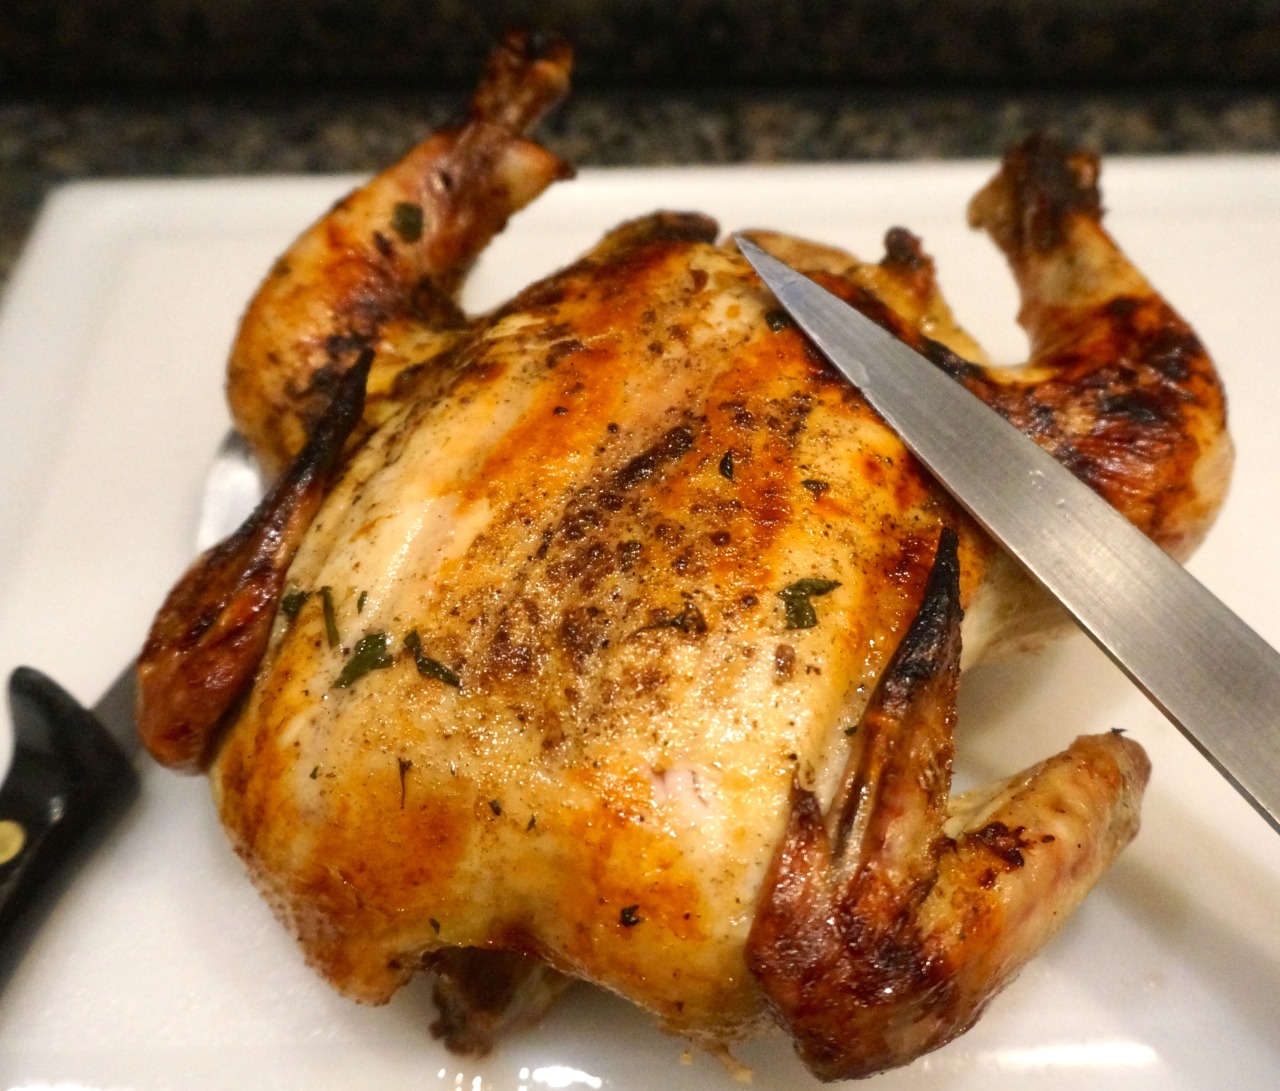 Some people think chicken is boring and unexciting, but I disagree, especially when it comes to a whole roasted chicken.
To me, a large roasted chicken coming out of the oven, crispy-skinned and glistening, fragrant with the aromas of a happy family...